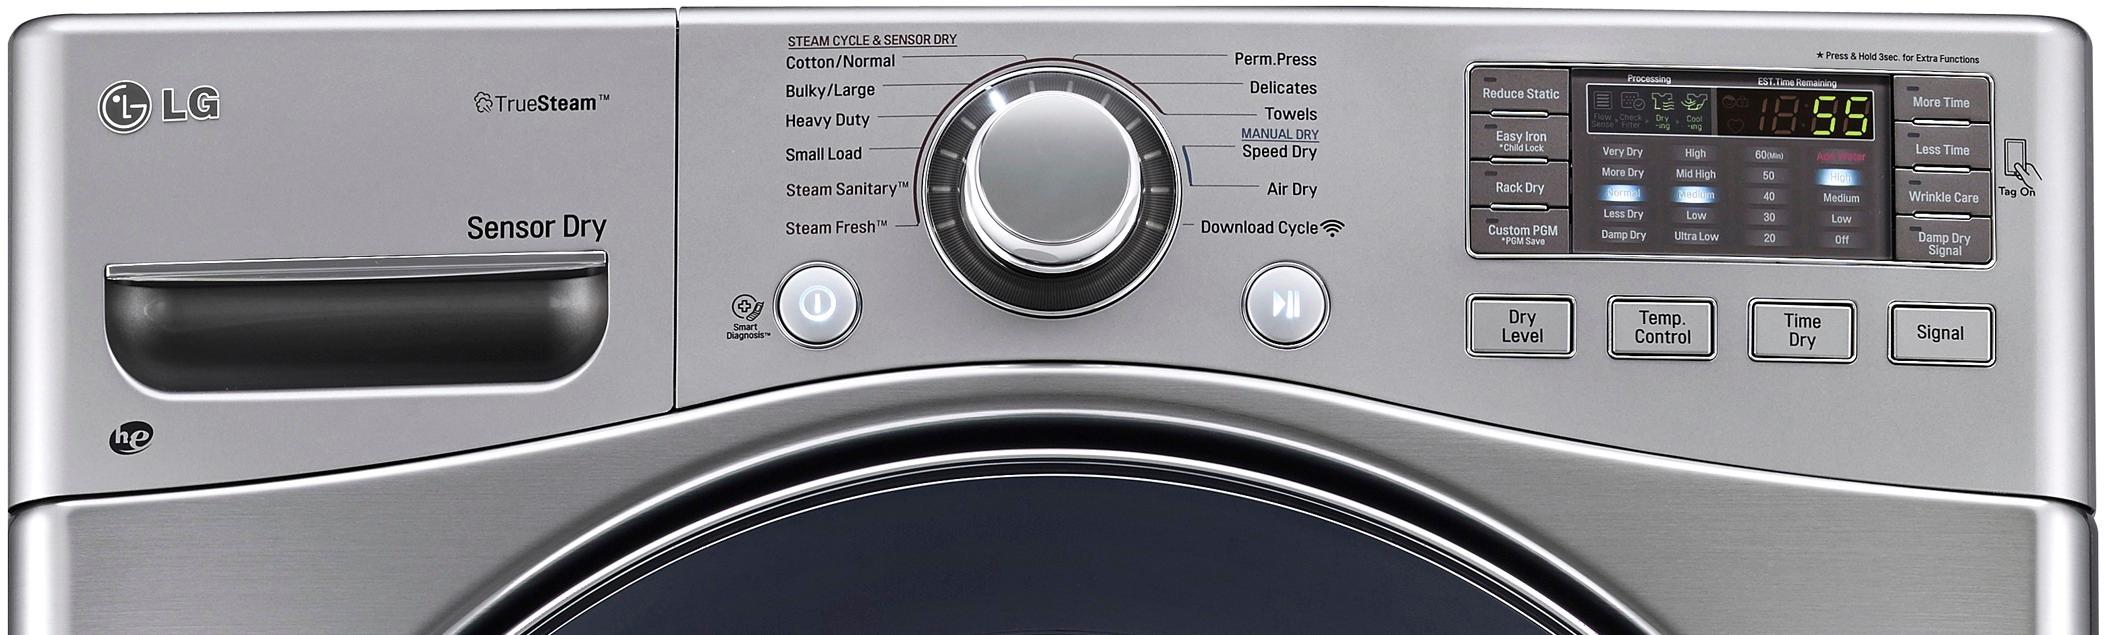 LG TrueSteam 7.4 Cu. Ft. 12-Cycle Electric Dryer with Steam Graphite ...